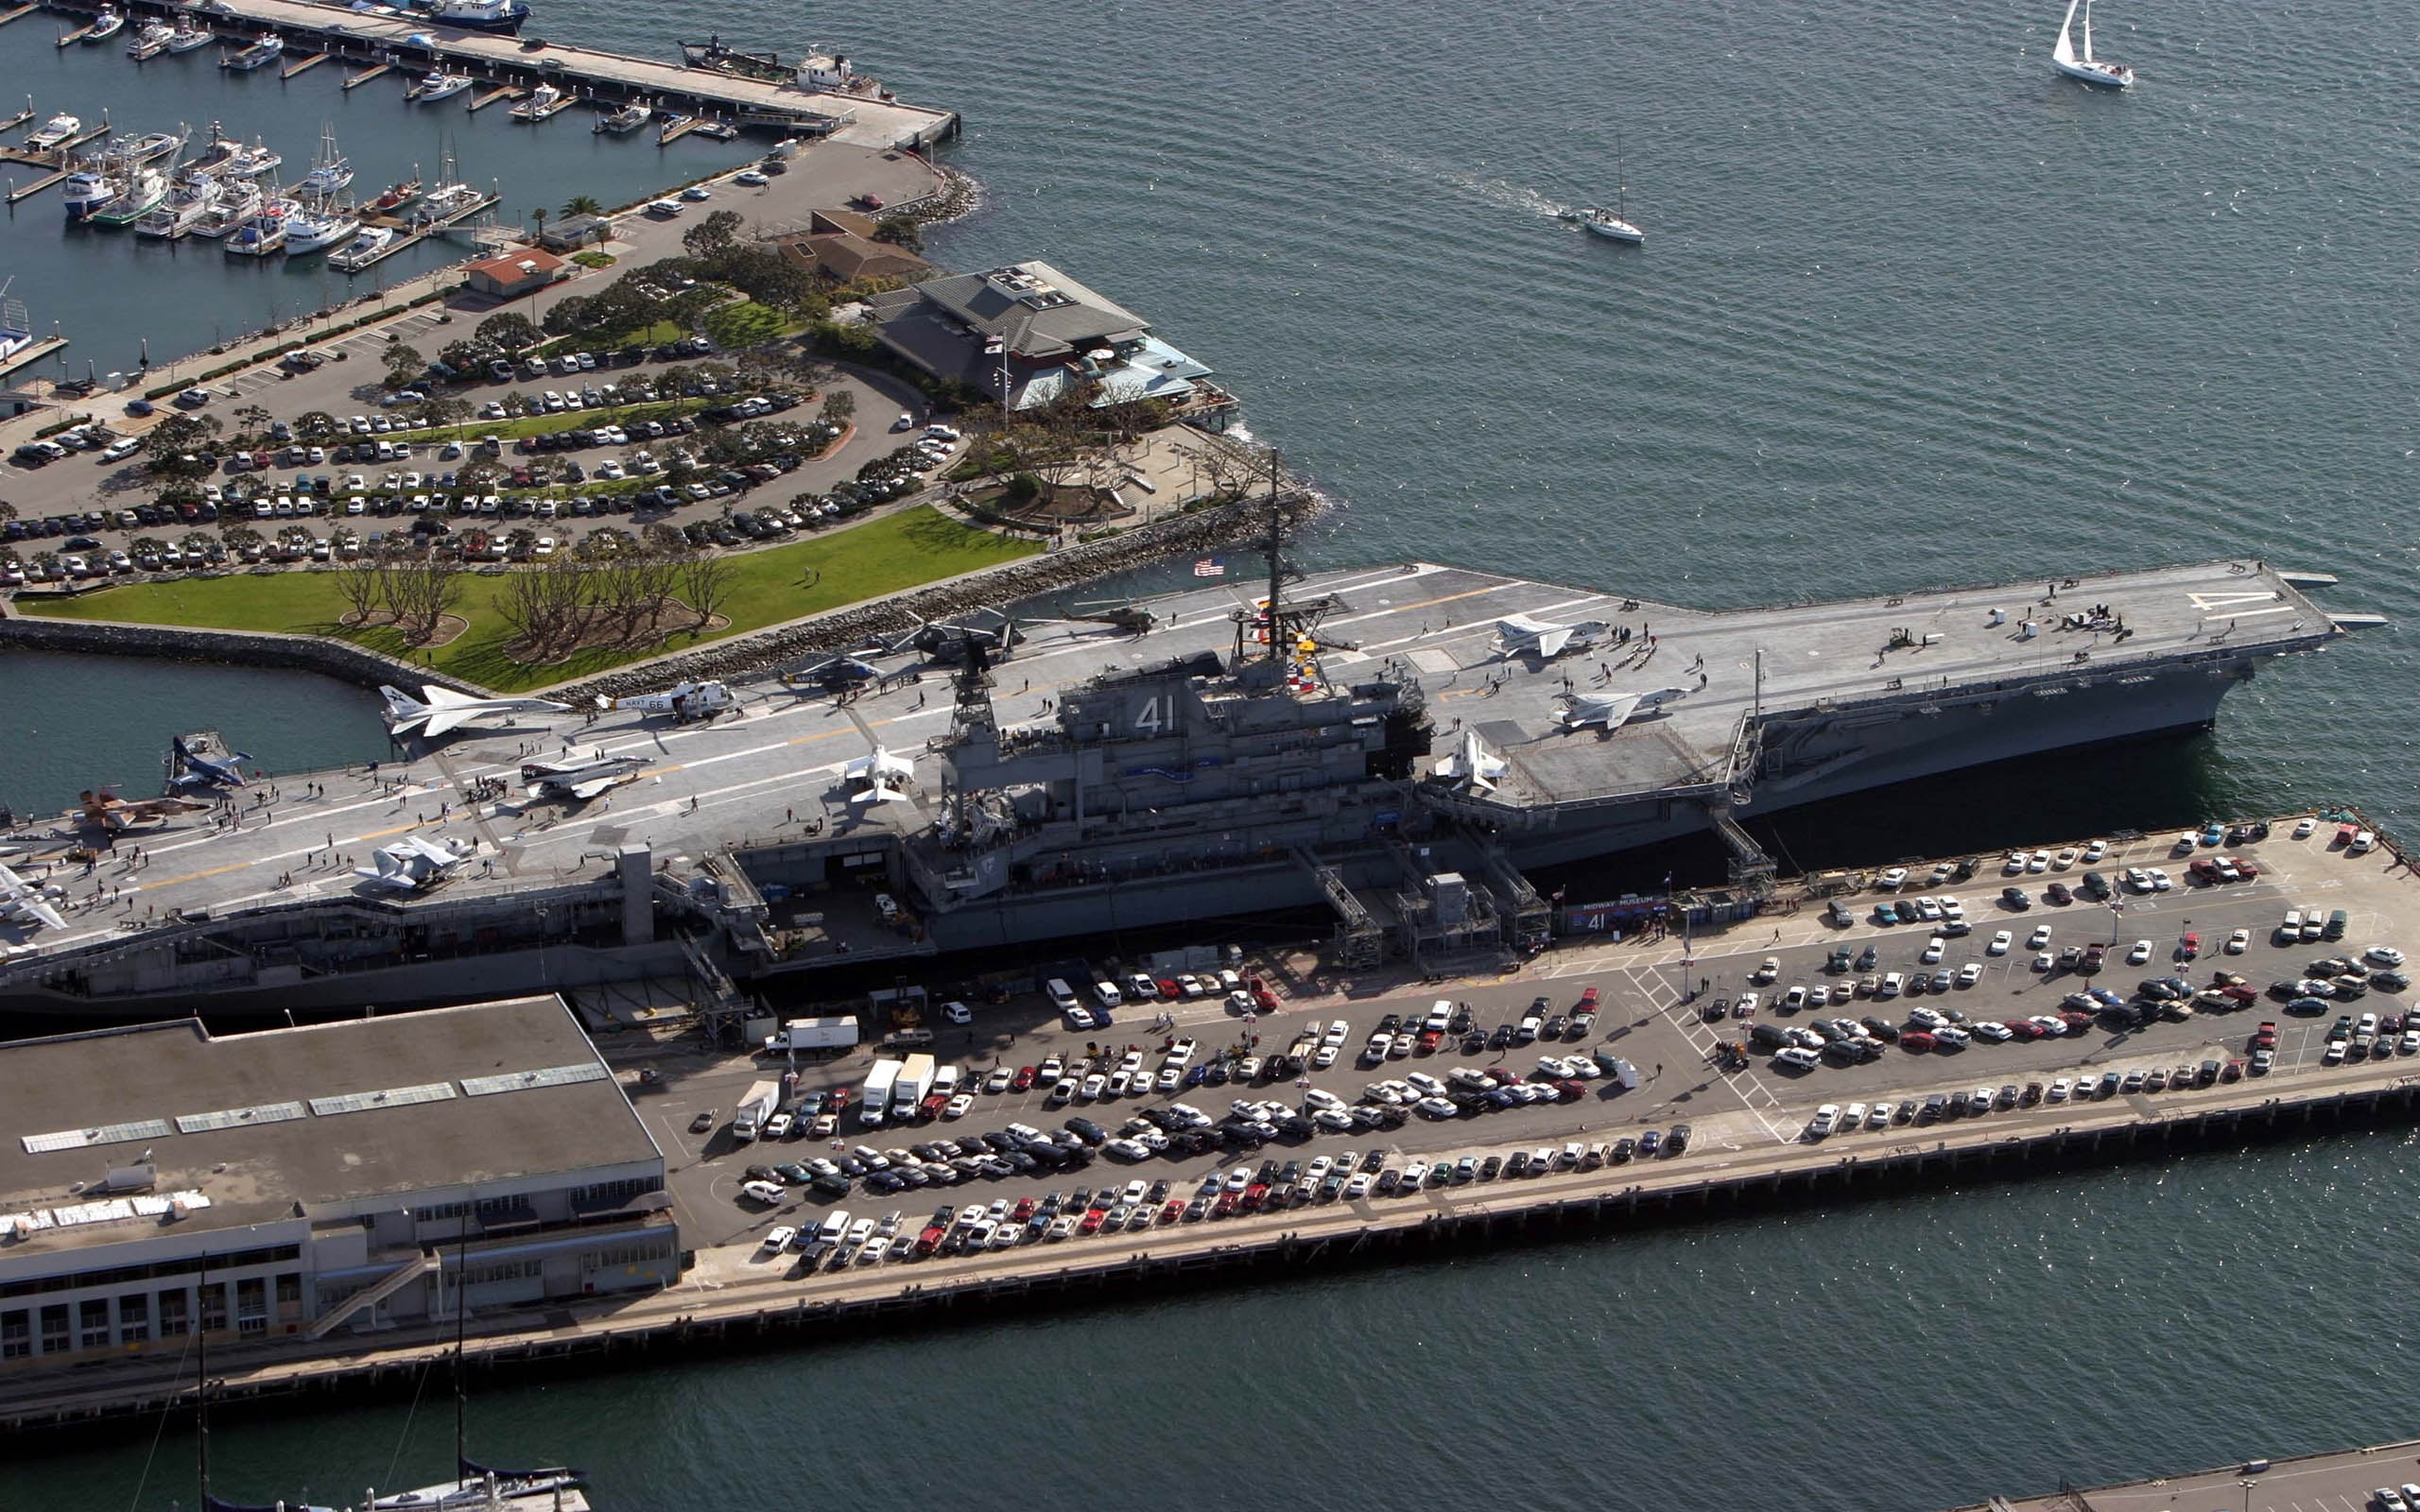 grey aircraft carrier, uss midway museum, san diego, california